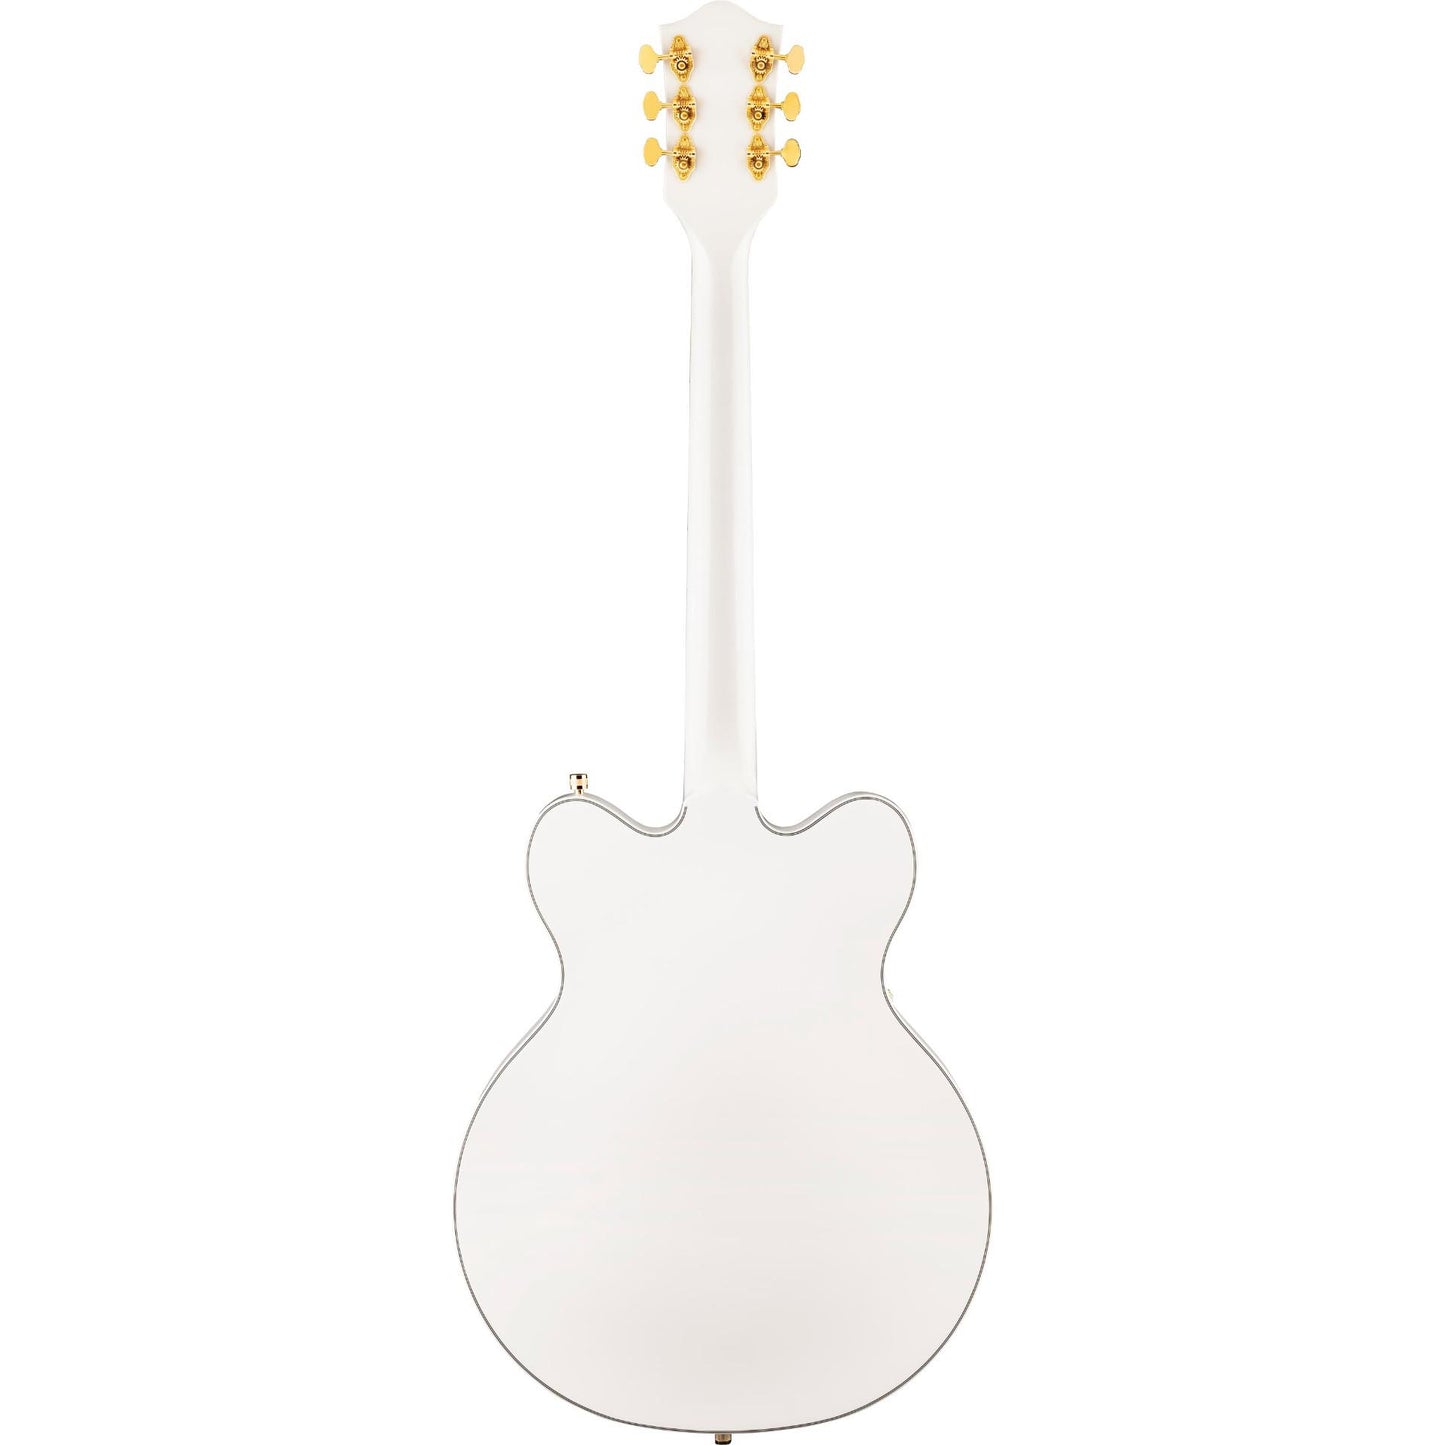 Gretsch G5422GLH Electromatic Classic Hollow Electric Guitar in Snowcrest White